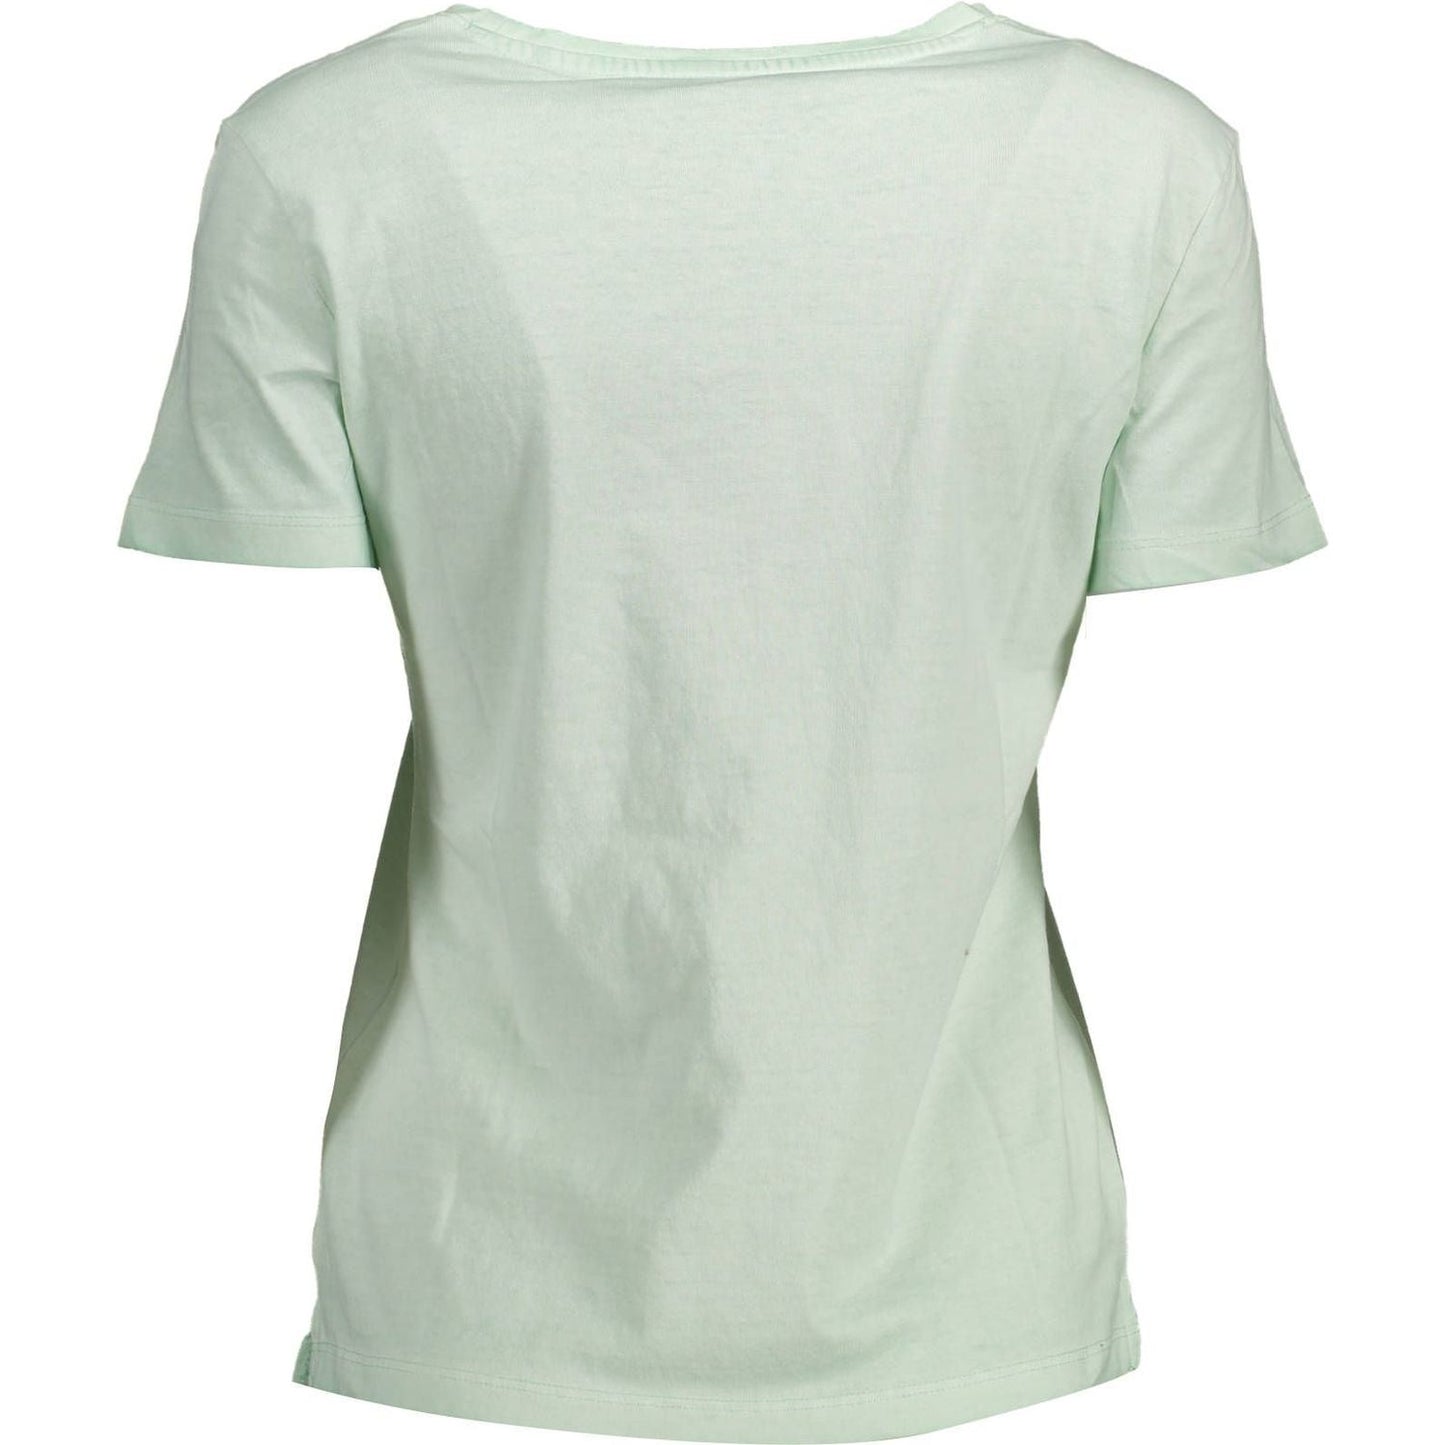 Guess Jeans Elegant Green Embroidered Logo Tee elegant-green-embroidered-logo-tee